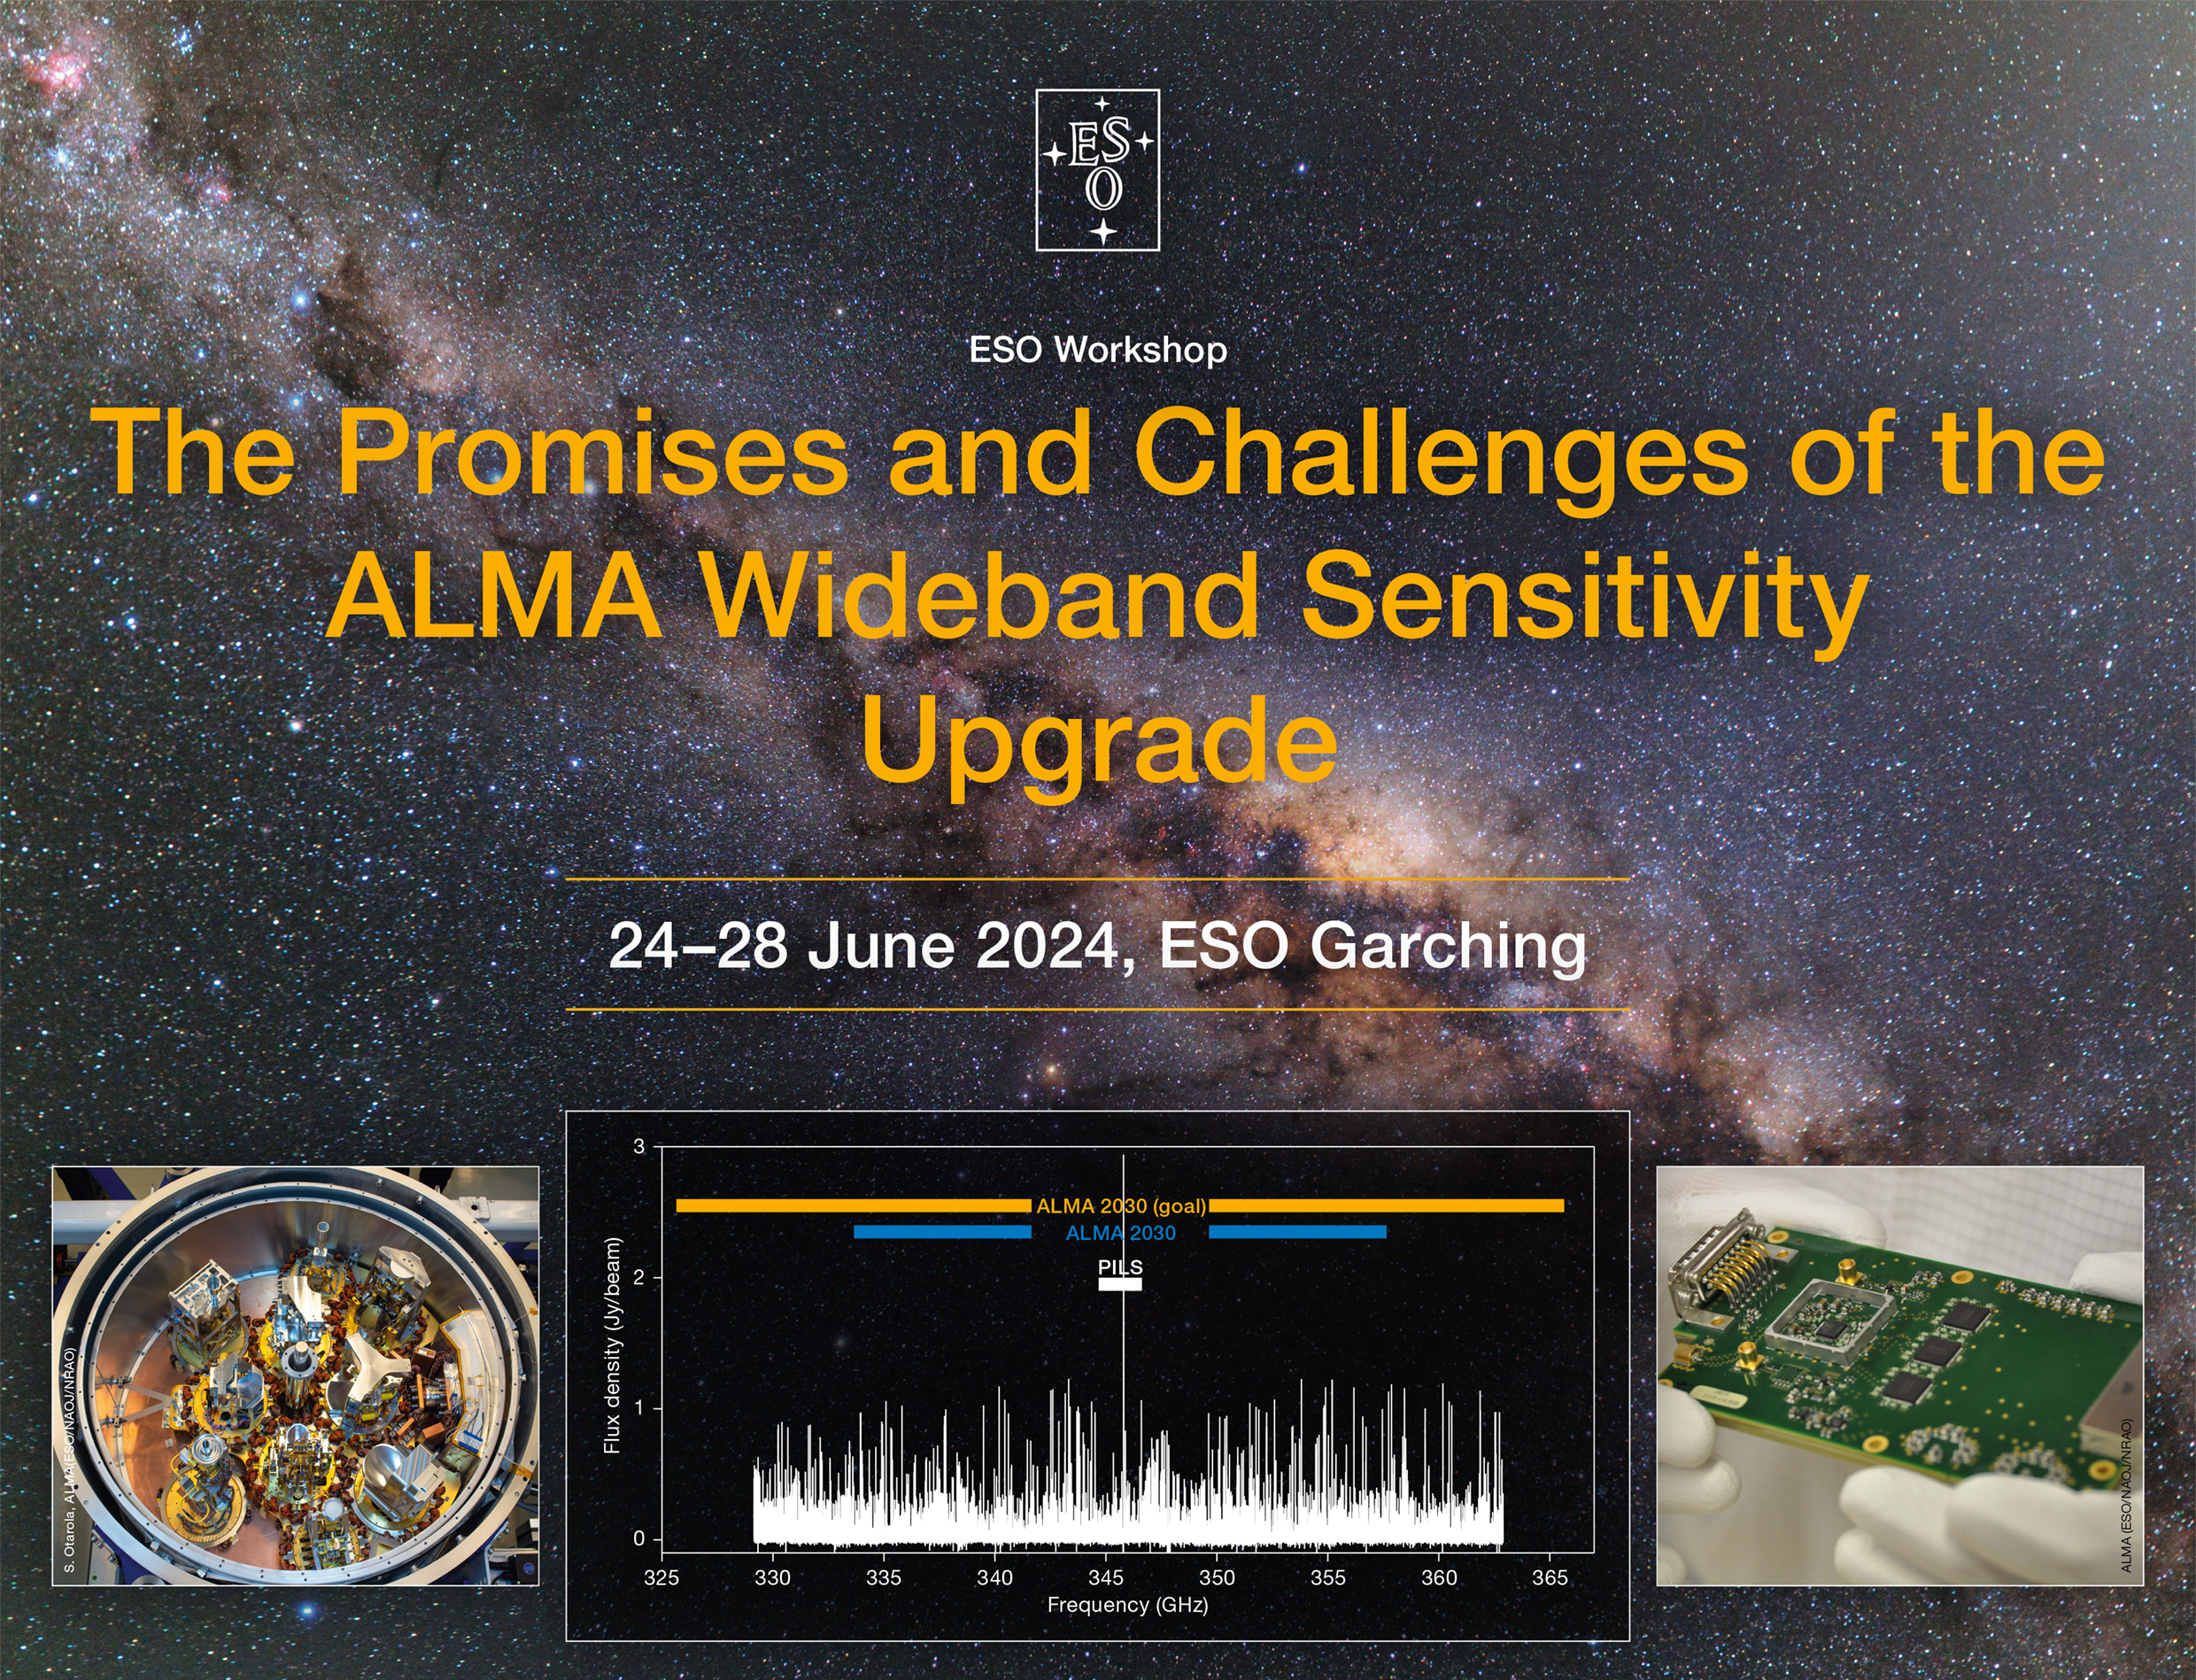 The Promises and Challenges of the Alma Wideband Sensitivity Upgrade